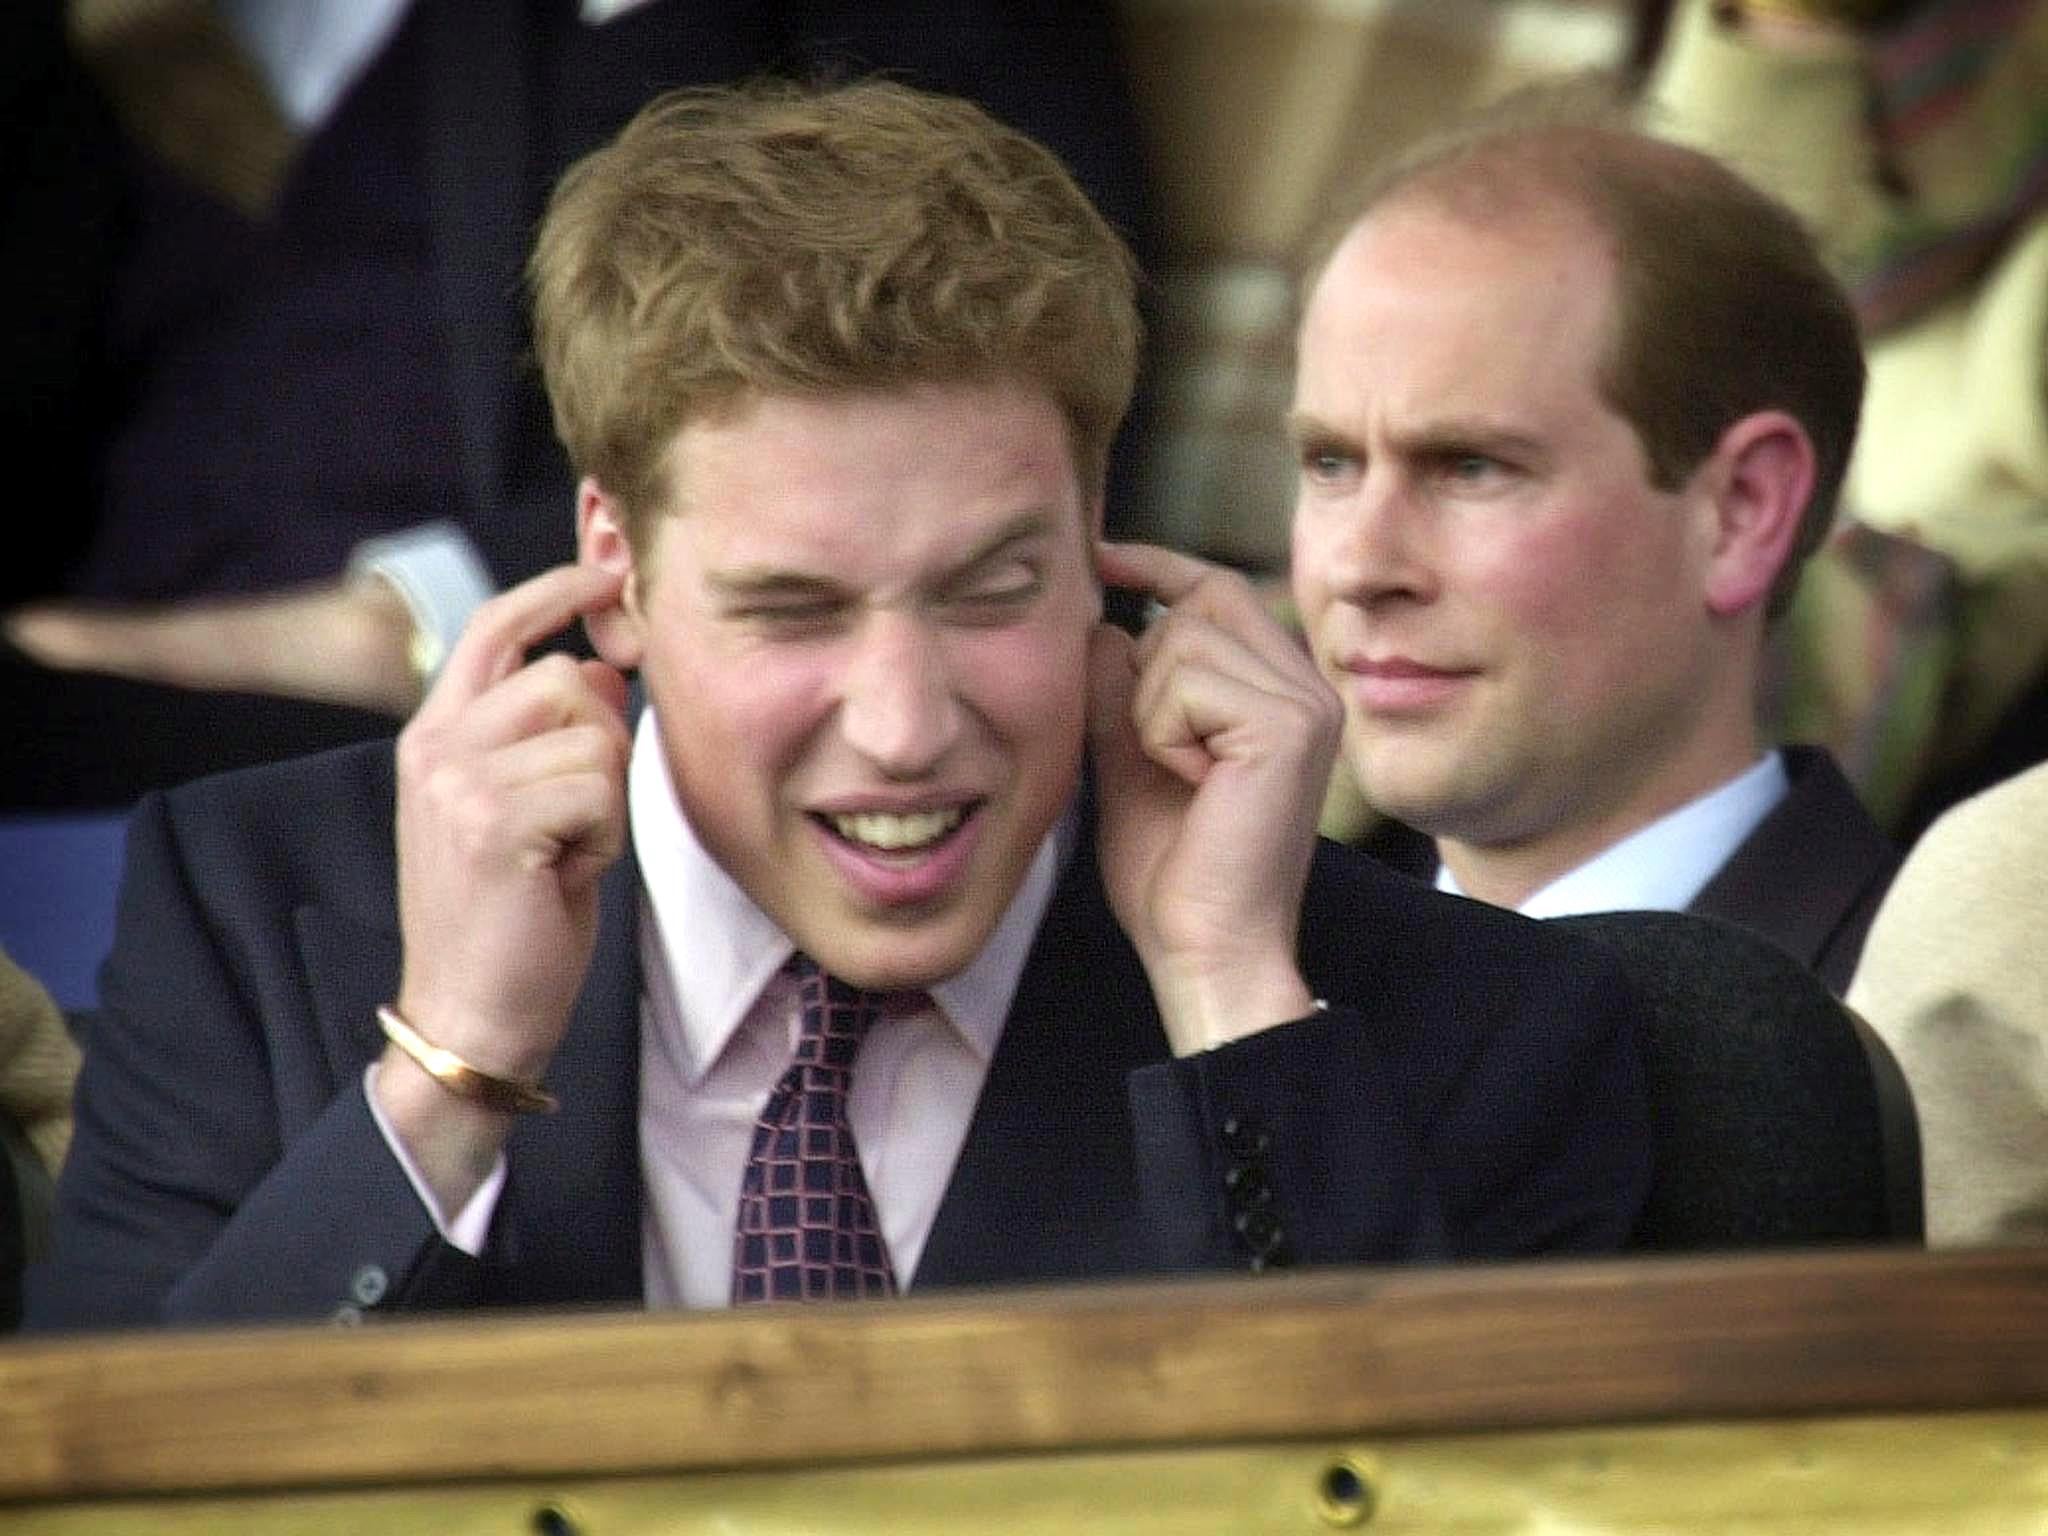 Prince William blocks his ears during Party at the Palace in the summer of 2002